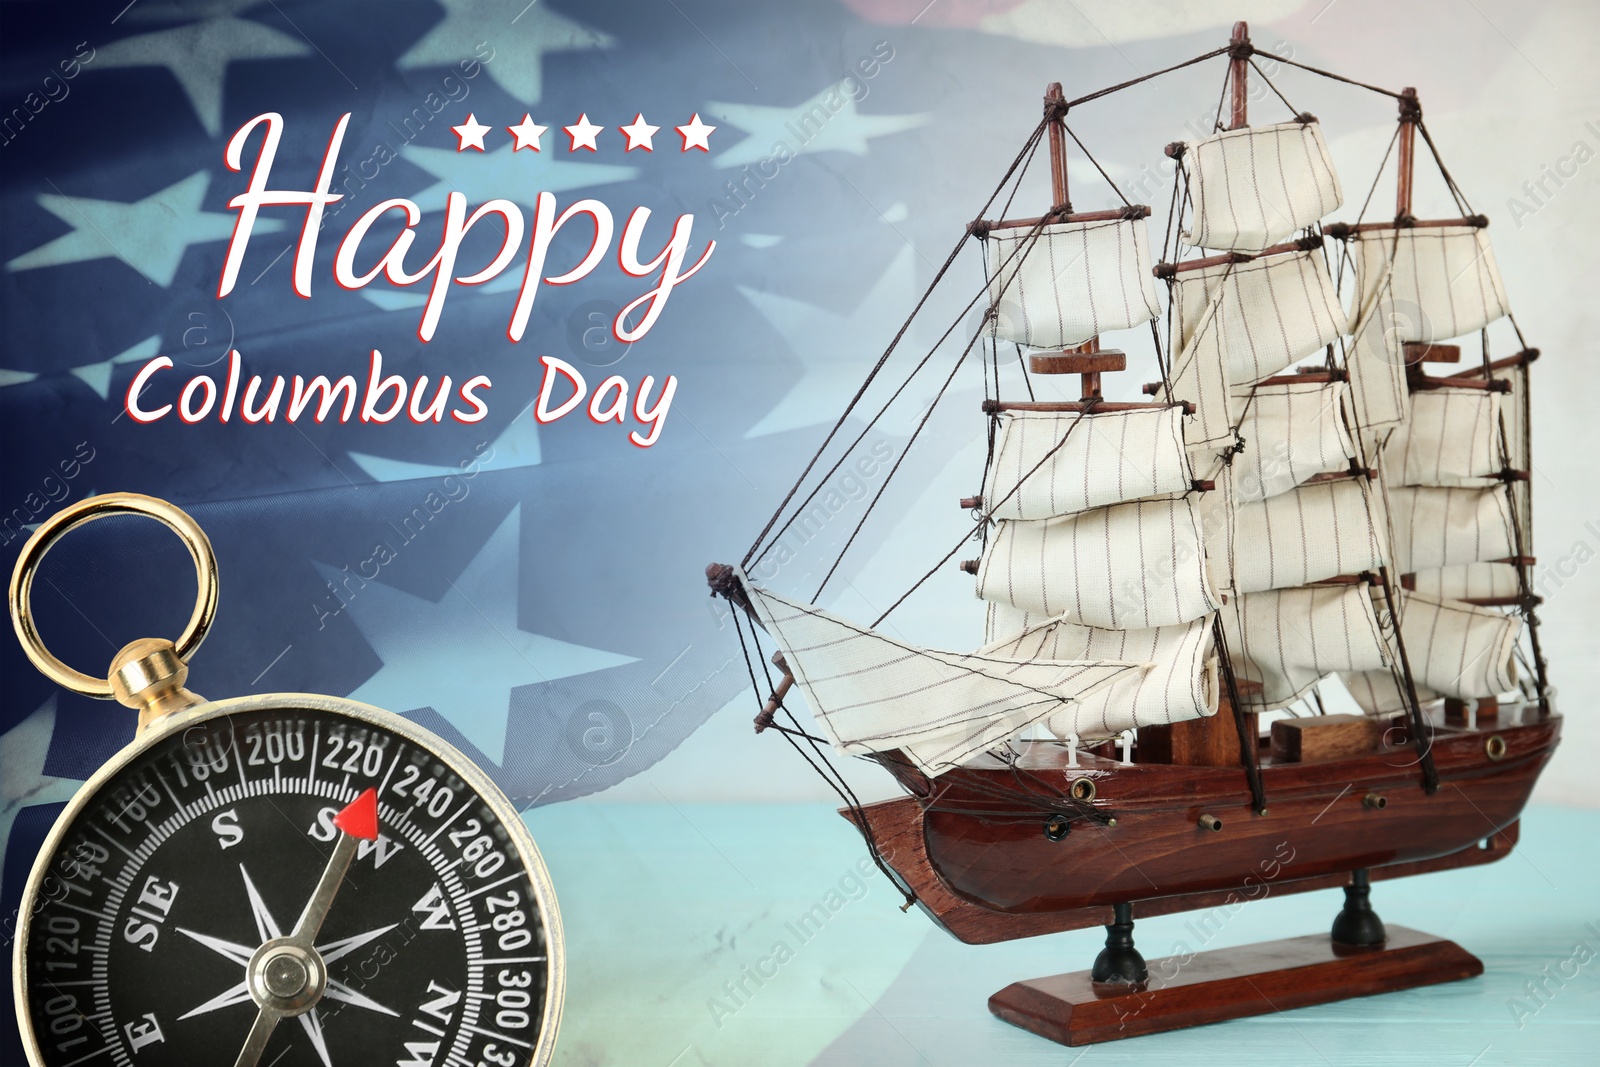 Image of Happy Columbus Day. Beautiful ship model, compass and American flag